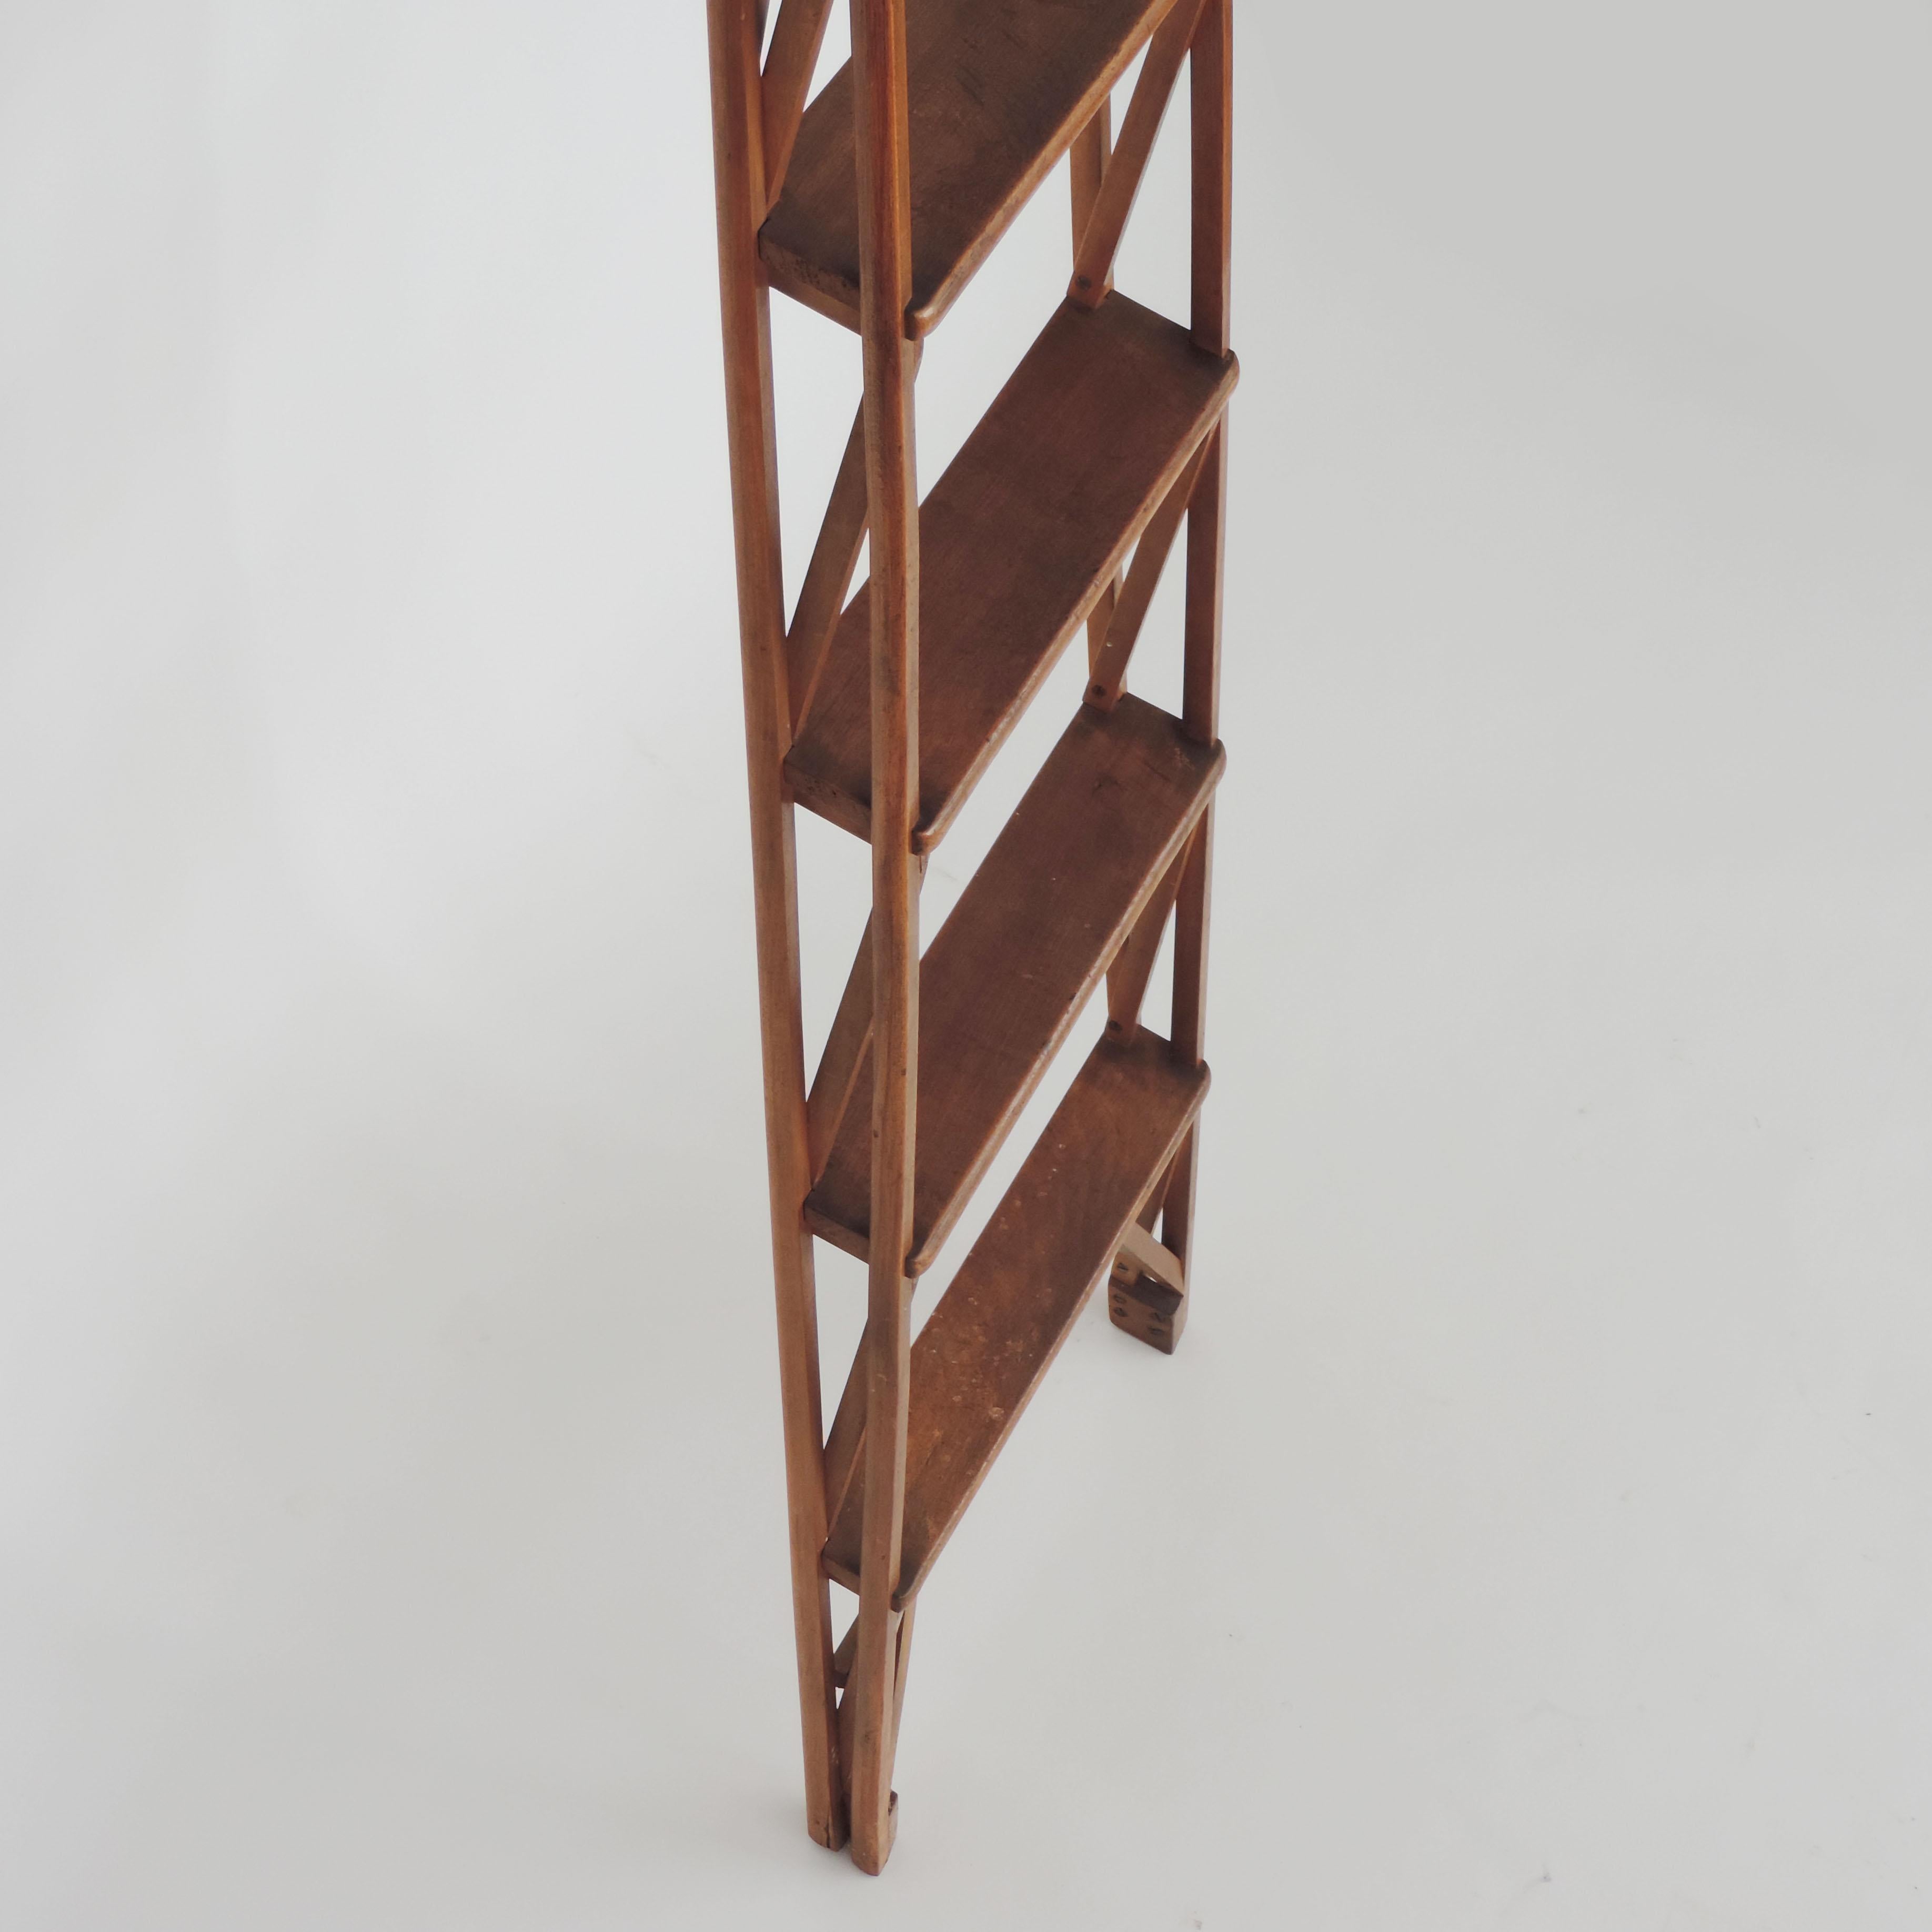 Wood Italian Architectural Library Ladder Attributed to Franco Albini, 1950s